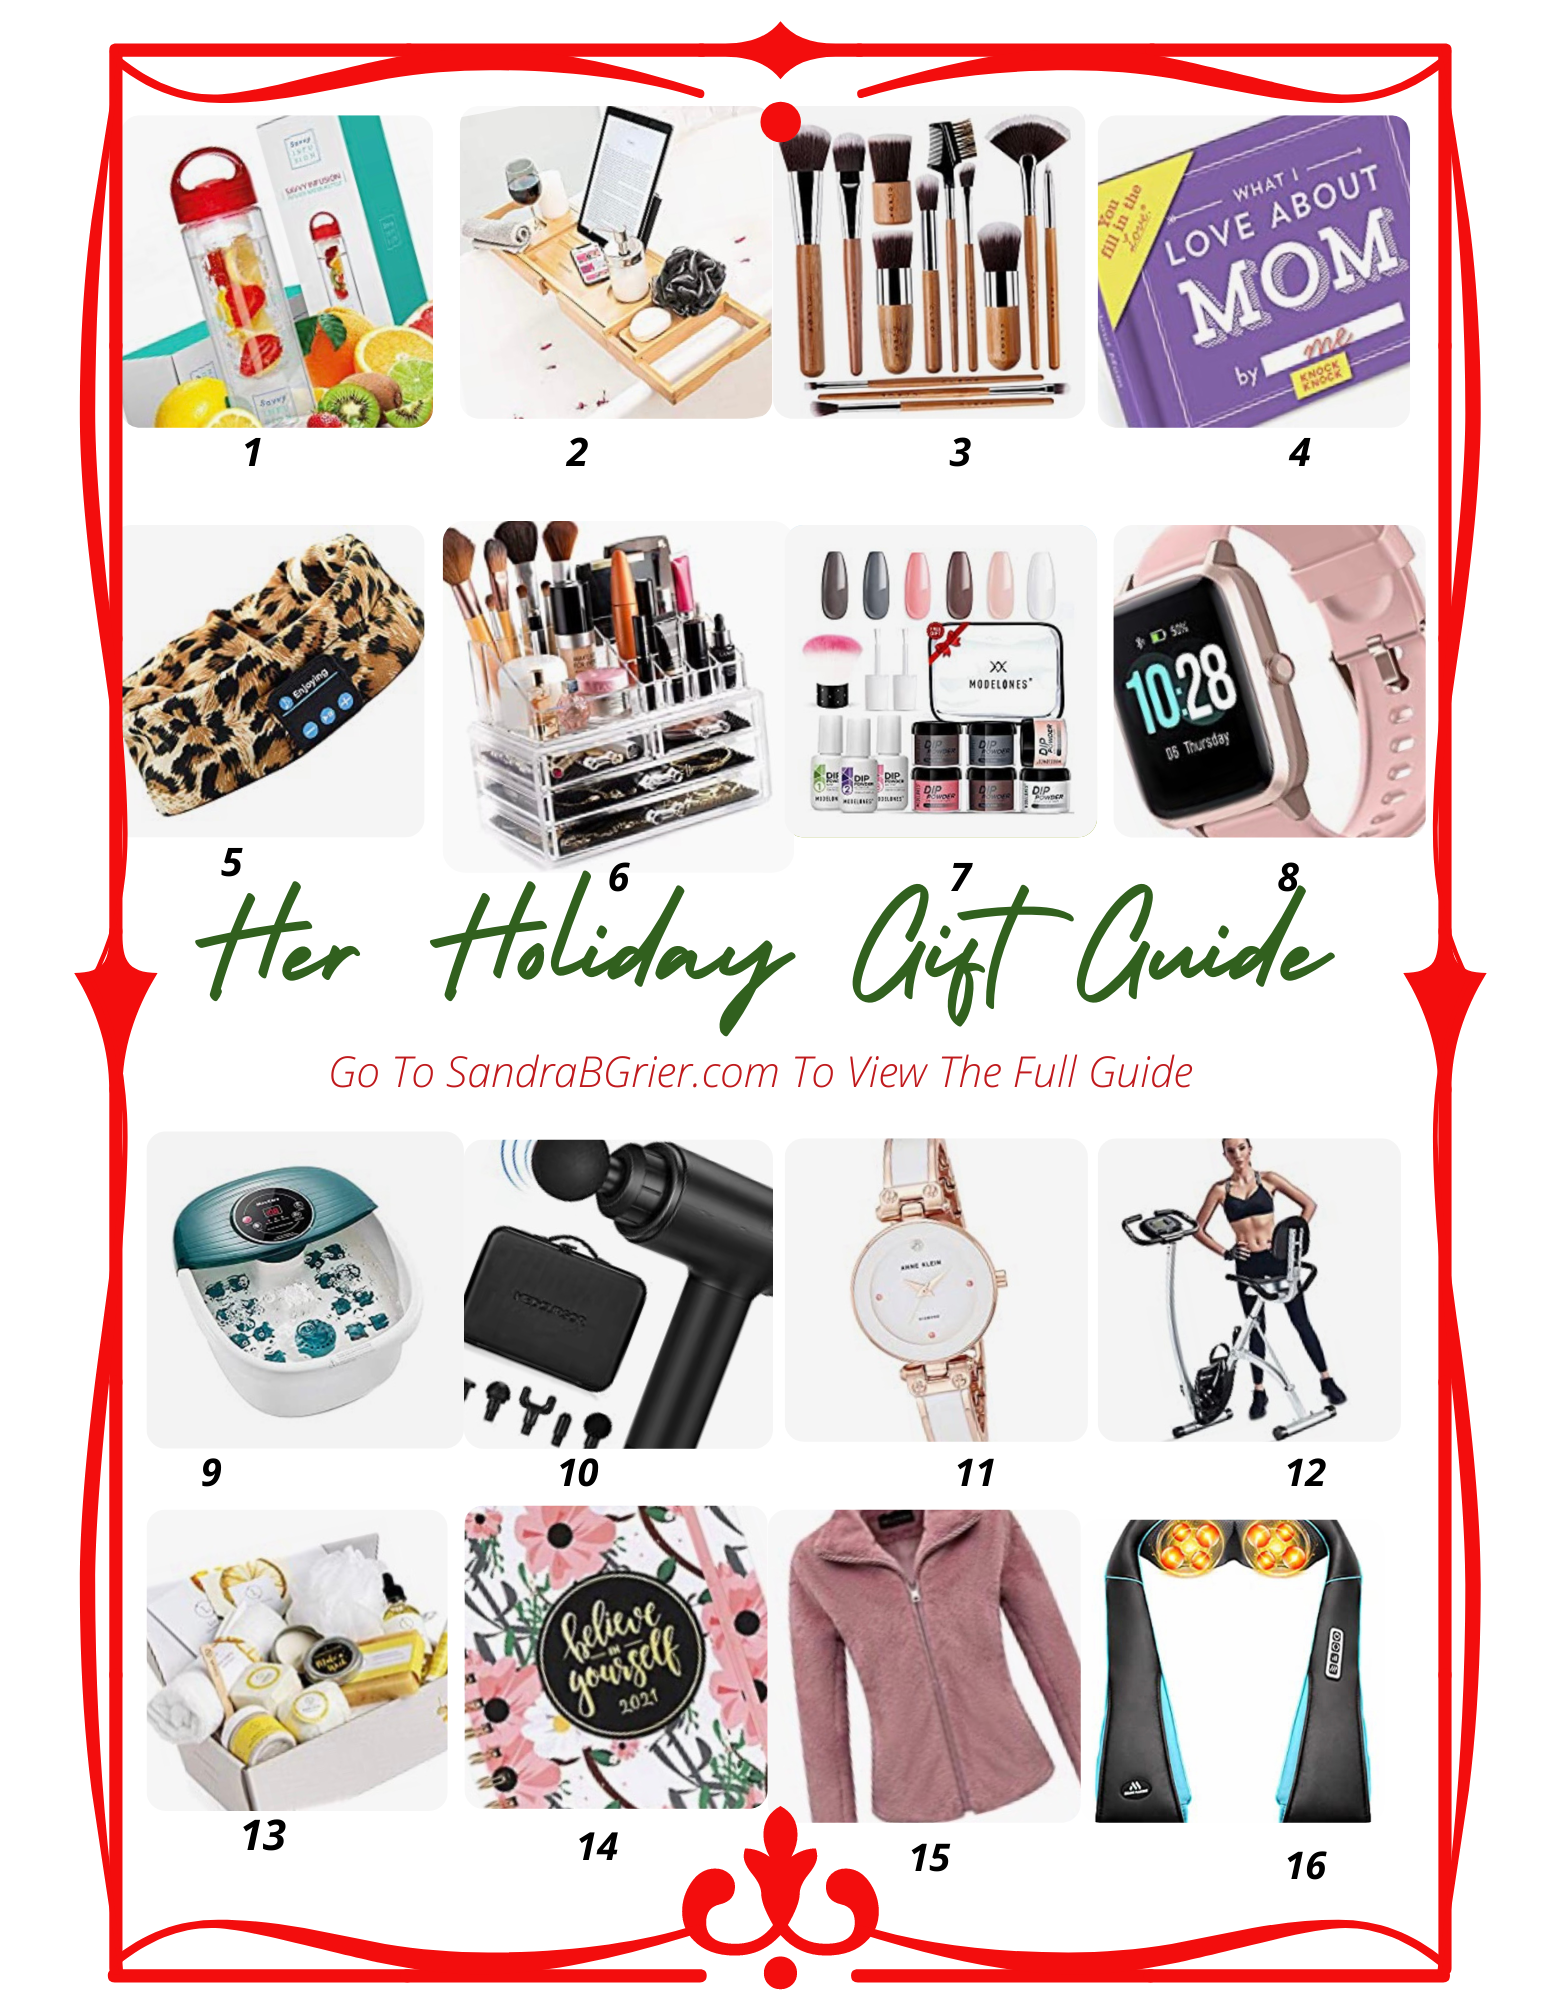 Holliday Shopping Guide For Her